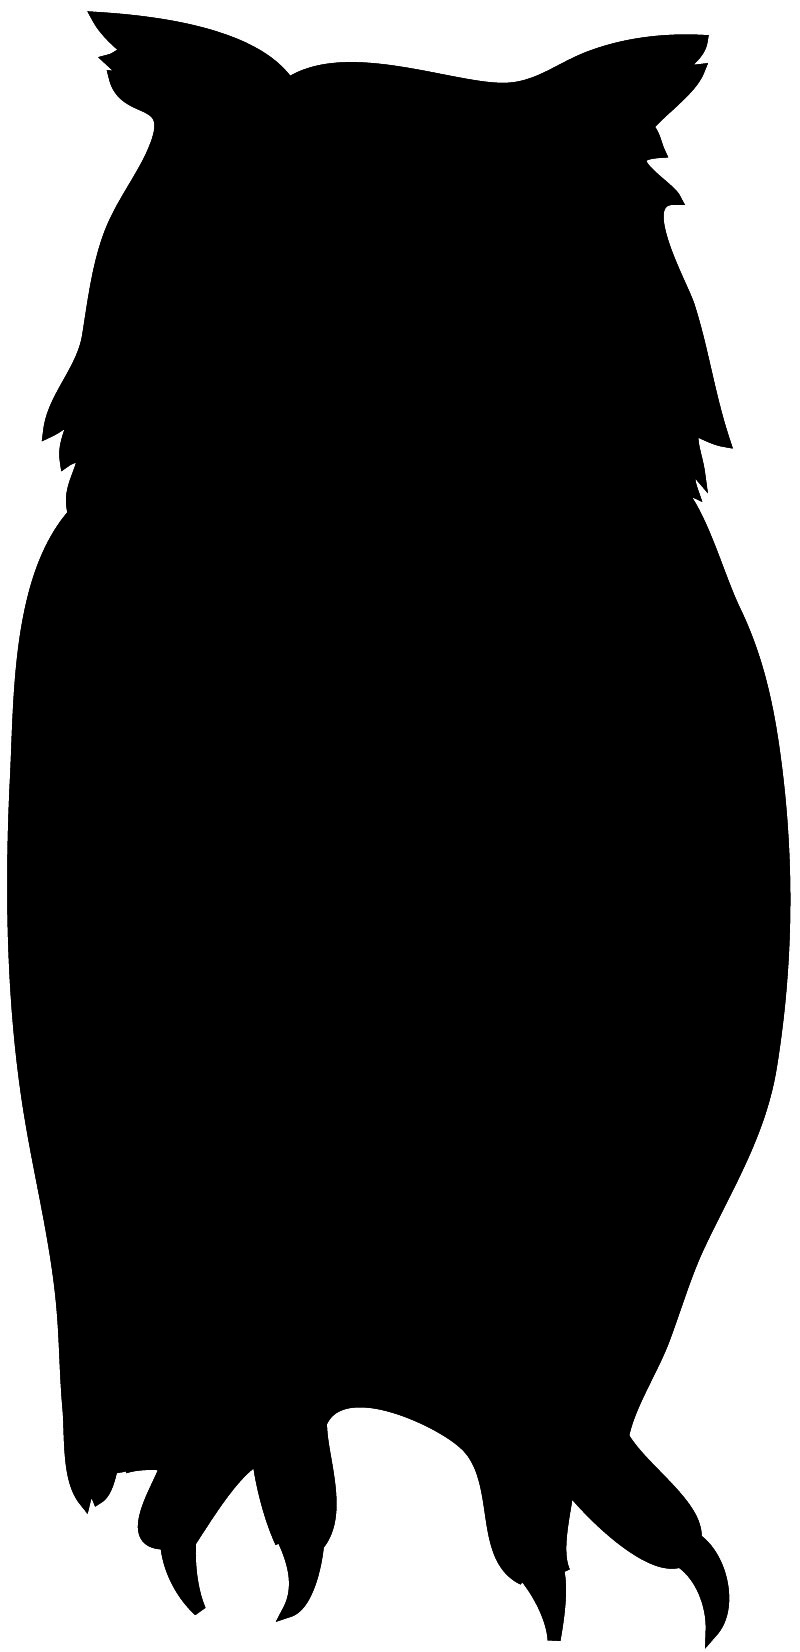 Owl Clipart Black And White Bird Silhouette Front Owl Clipart Jpg